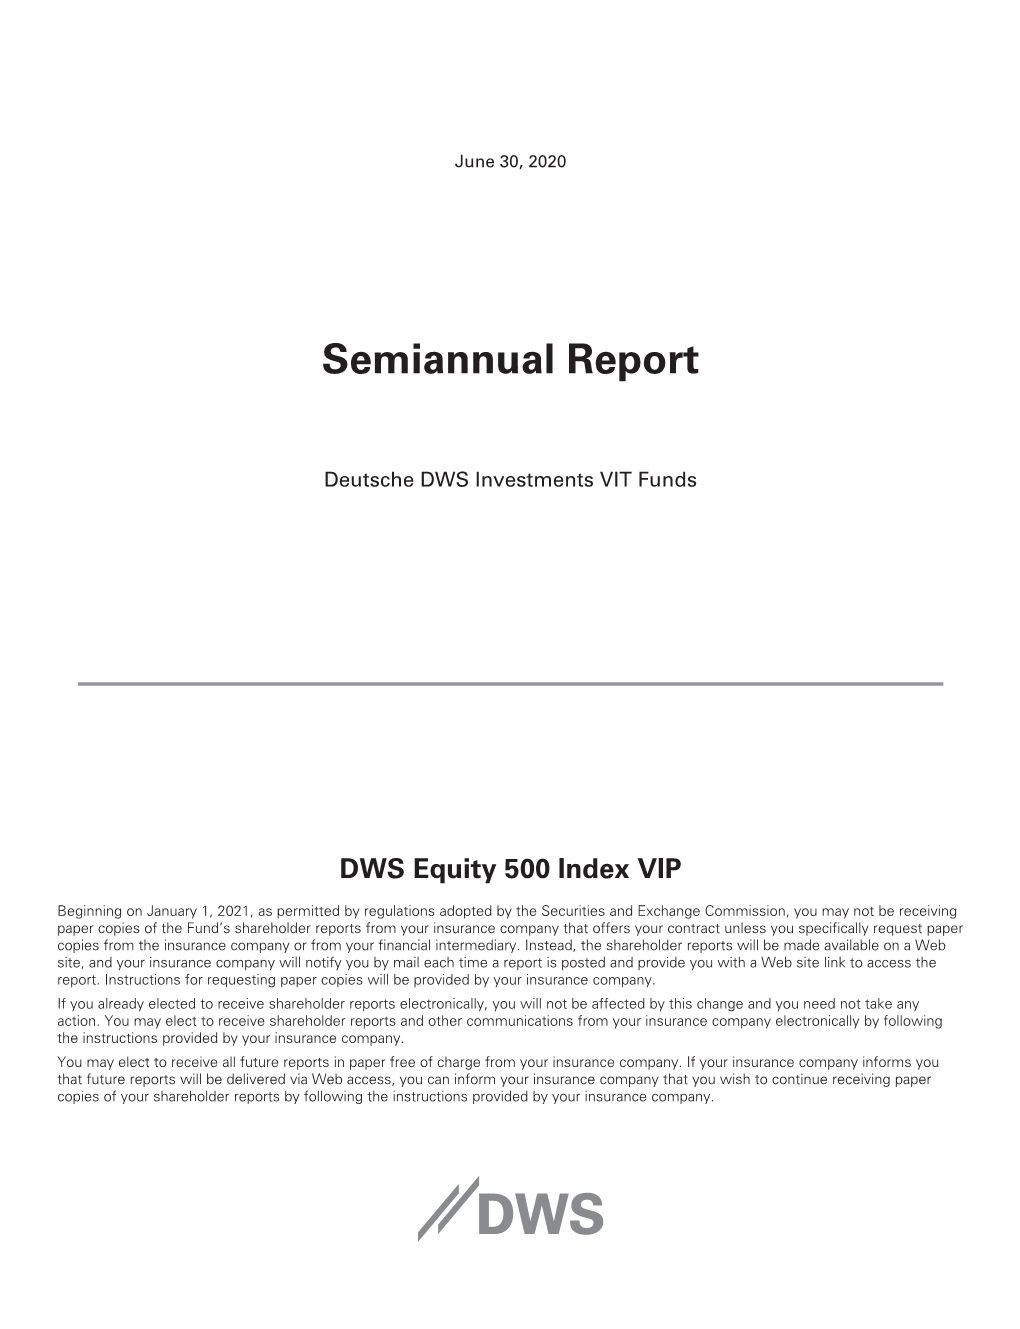 DWS Equity 500 Index VIP